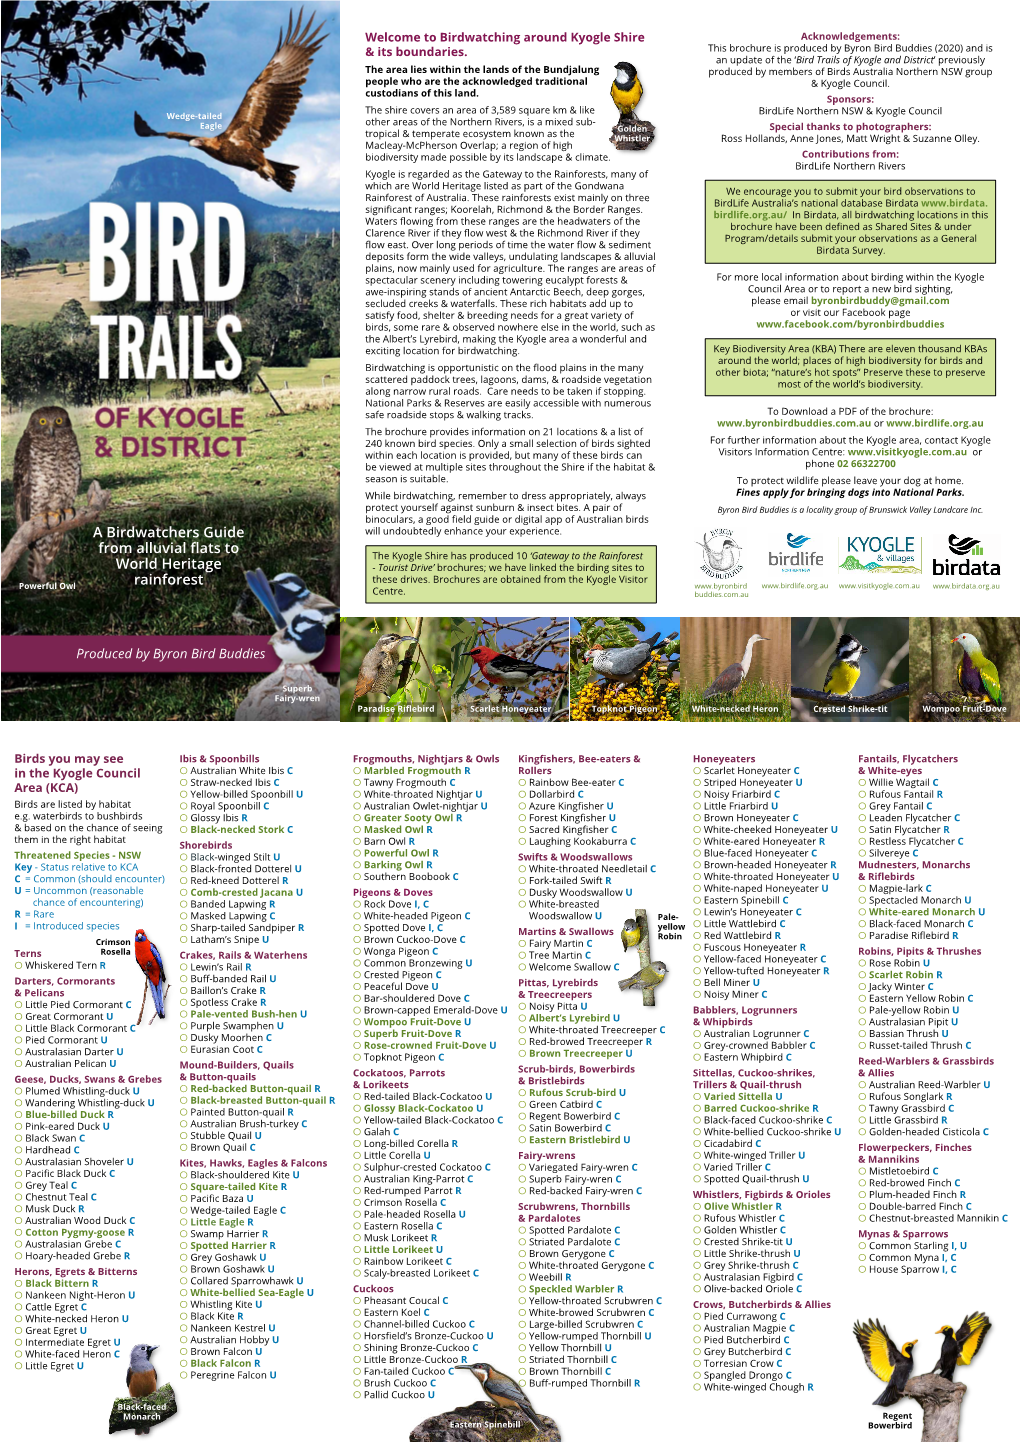 A Birdwatchers Guide from Alluvial Flats to World Heritage Rainforest